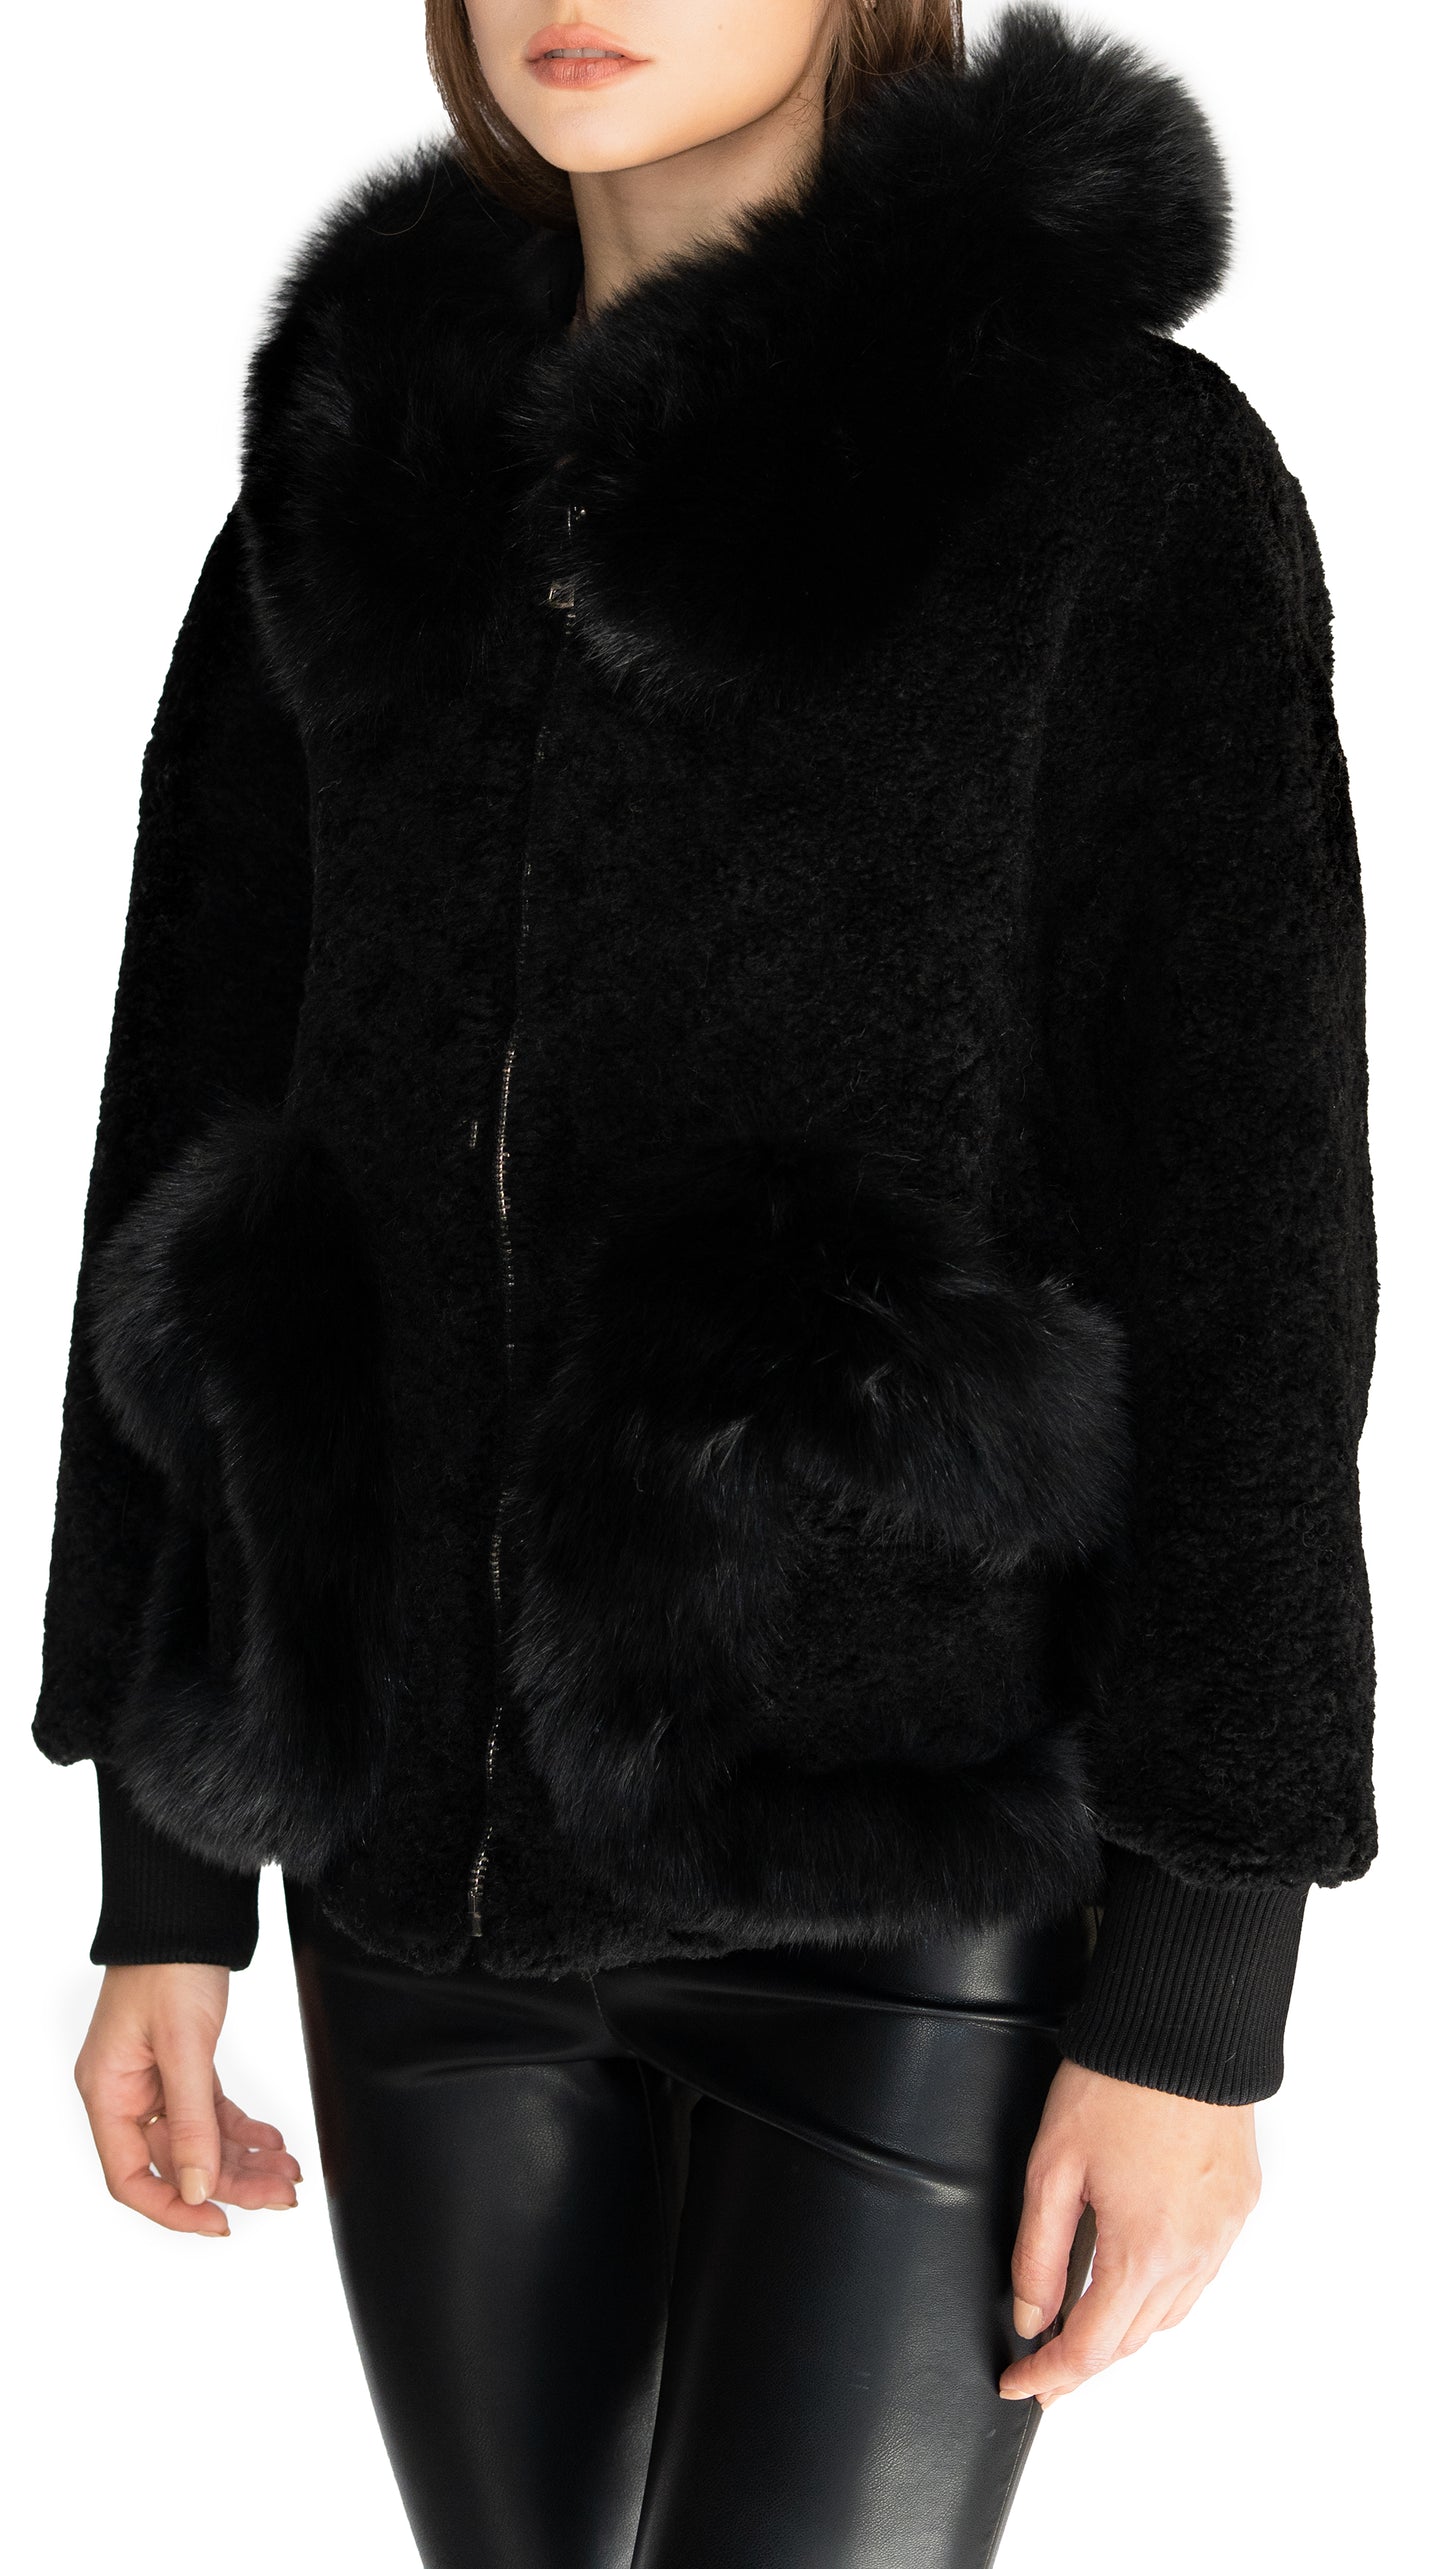 Daniella Erin shearling coat with fox fur trimmed hood and pockets in black